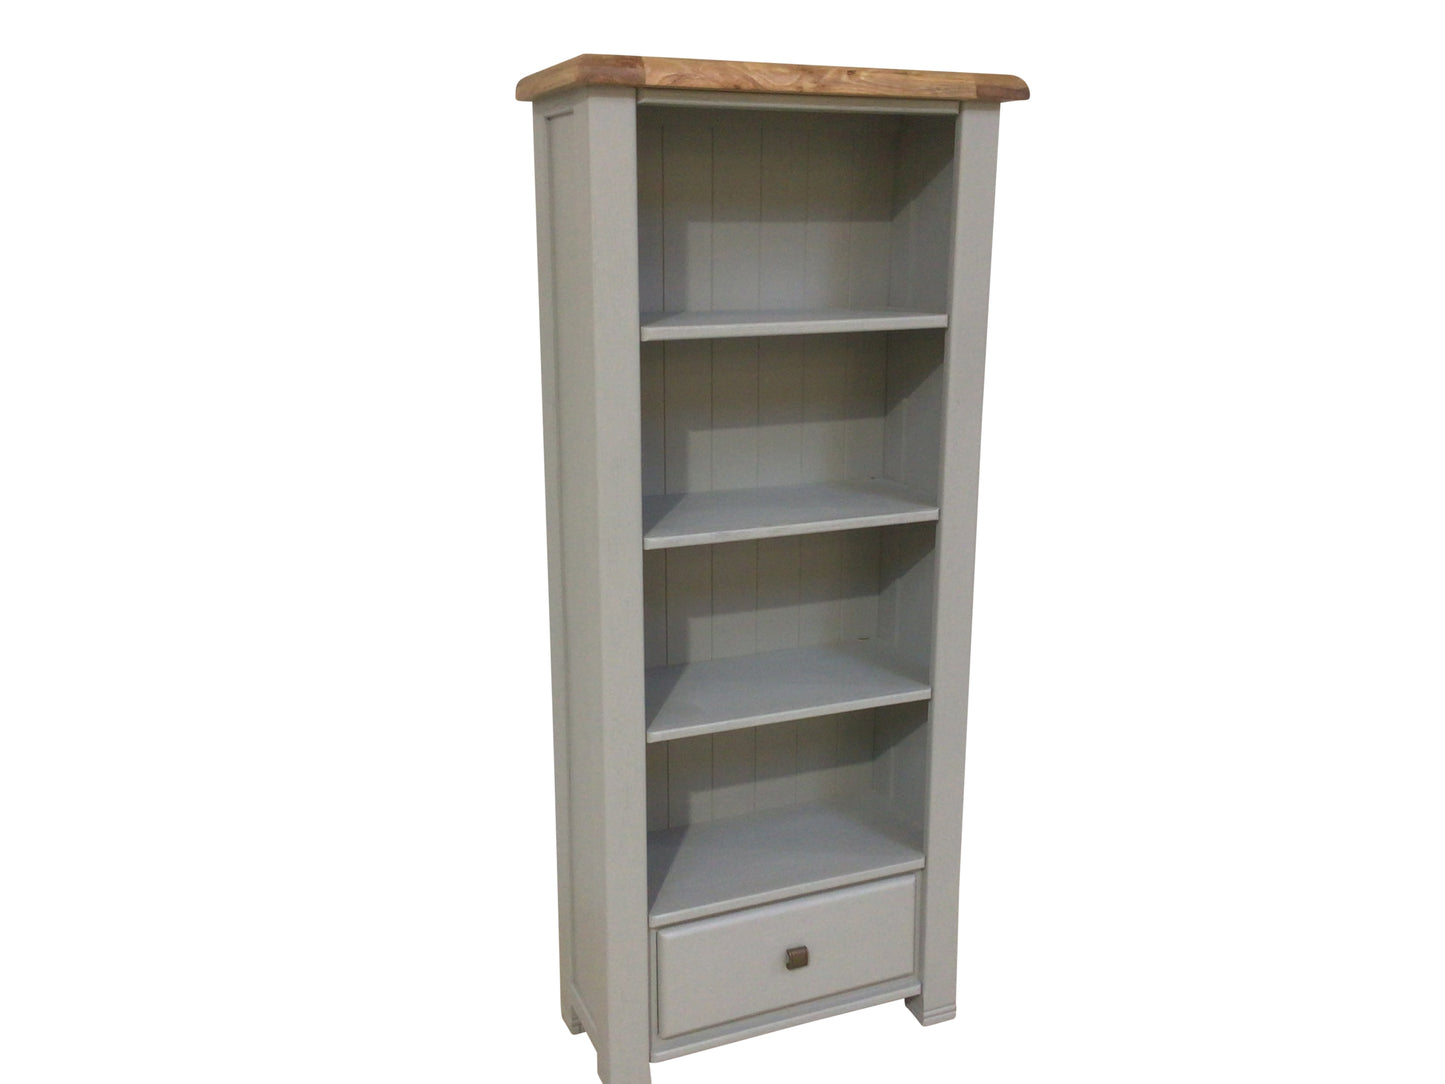 Danube Oak bookcase painted French Grey